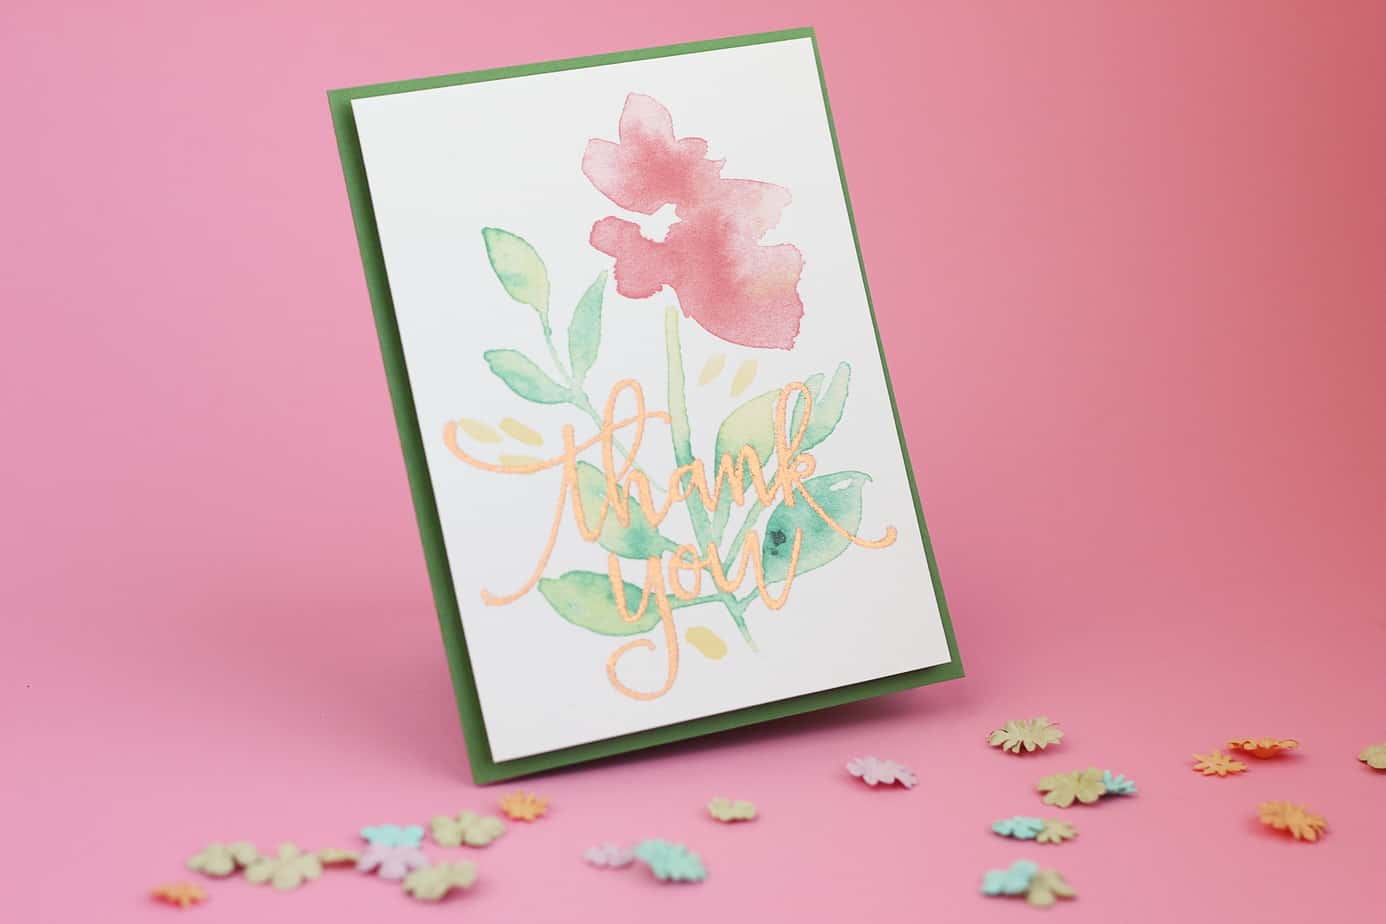 How To Use Foil Transfer Sheets